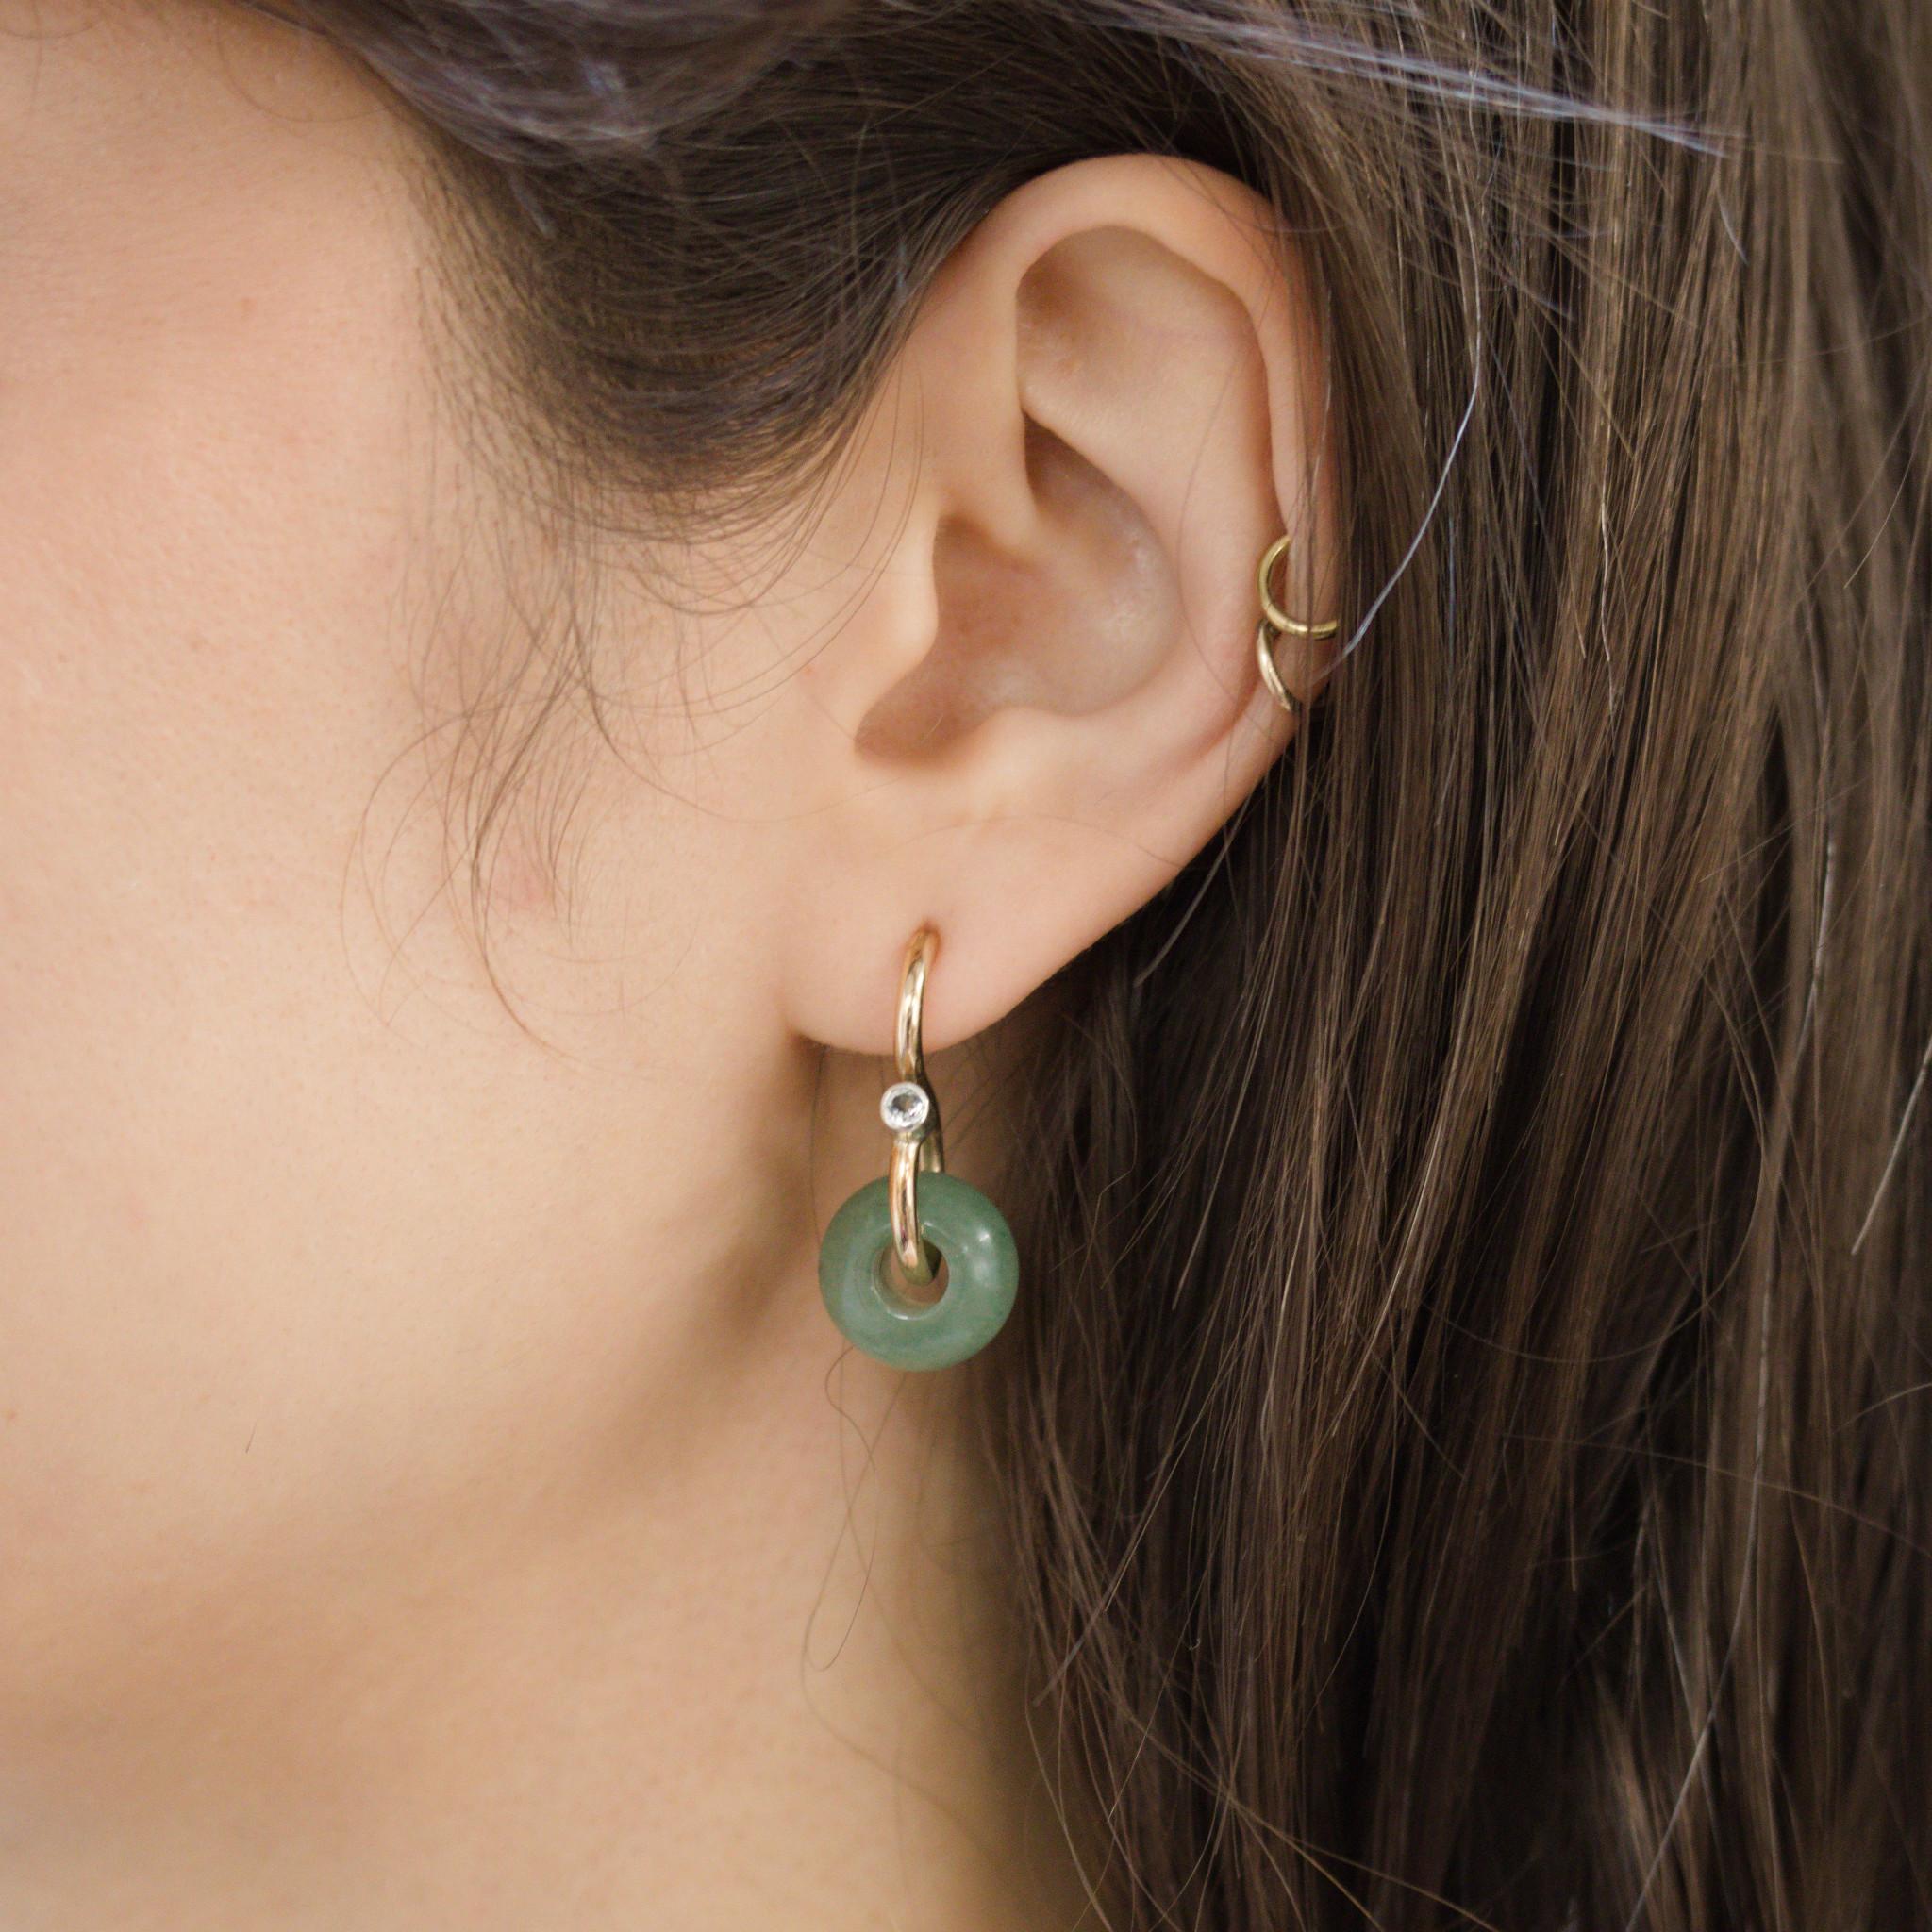 Inspired by the S shaped chain link created for the poise necklace, the signature poise earrings featuring aventurine and white topaz transform the simple hook design into an elegant yet modern piece of jewellery. A unique shape, the poise earring